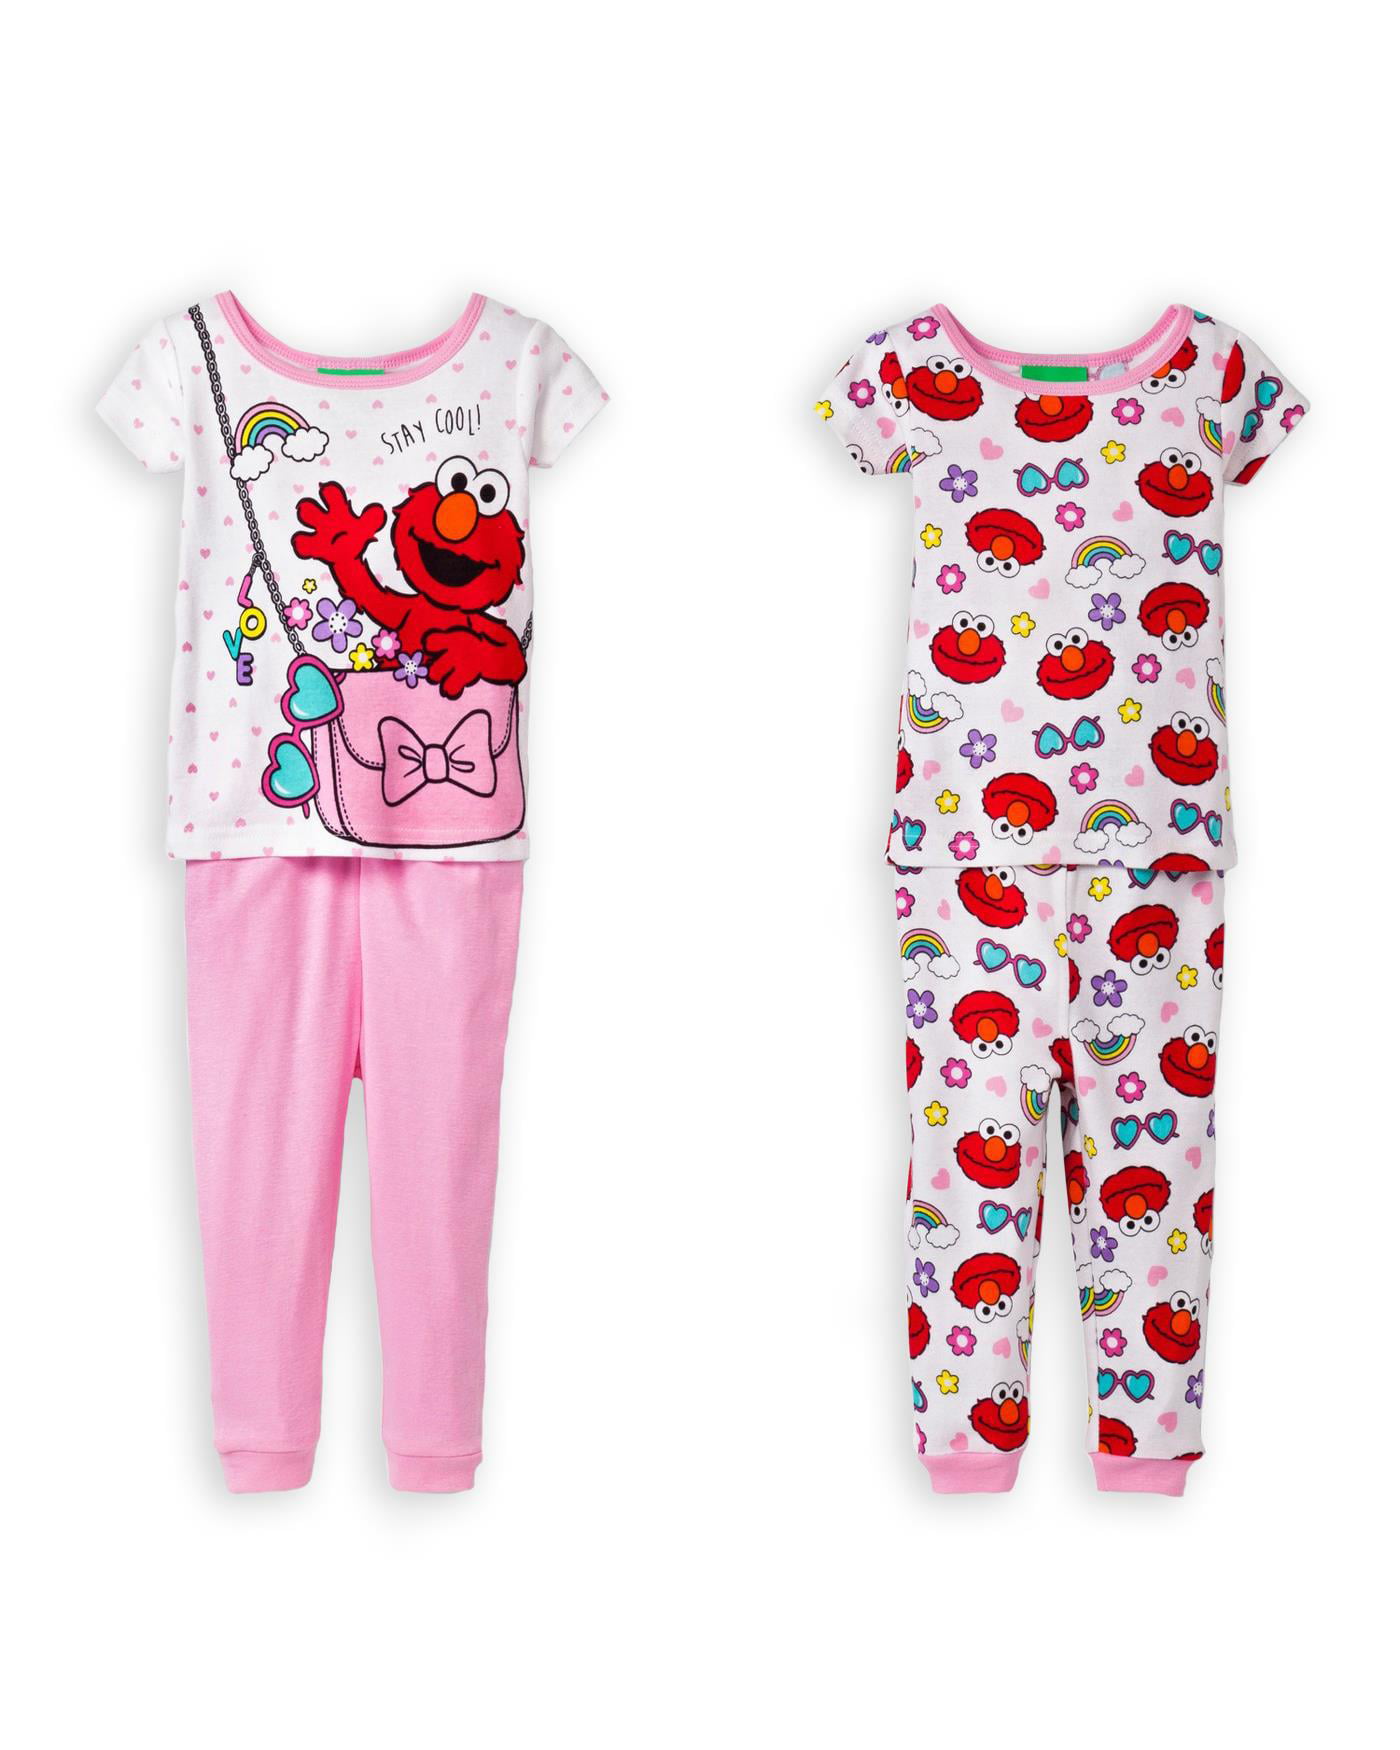 LNGRY Baby Clothes,Toddler Infant Boys Girls Fall Moon Star Print T-Shirts Tops+Pants Pajamas Clothes Sets